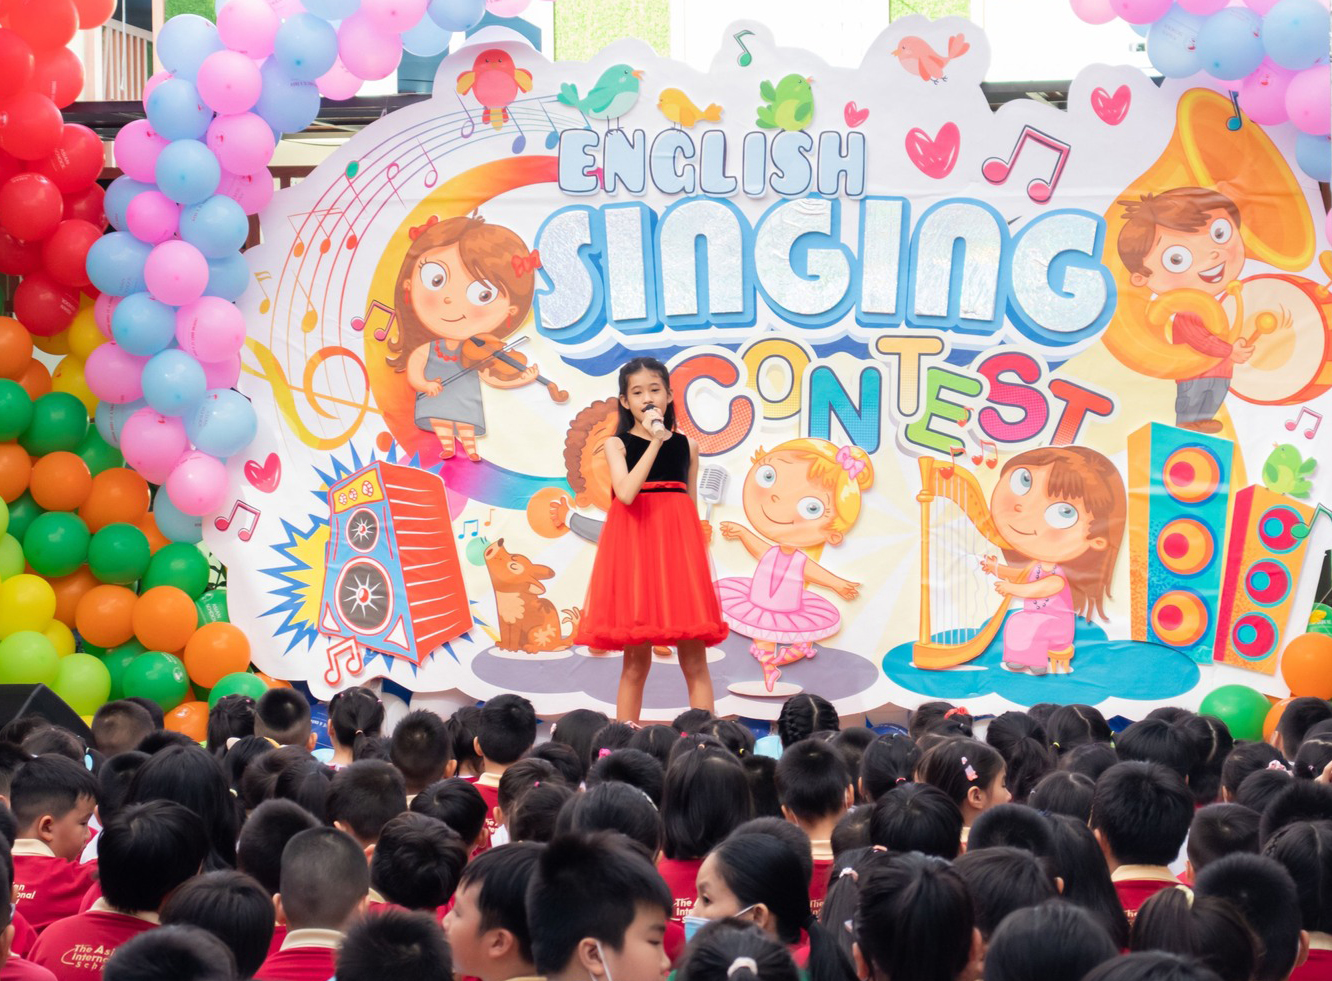 Kế Hoạch Thi Tiếng Hát Tiếng Anh English Singing Contest<img src='/App_Themes/Default/Images/iconnew.gif' alt='' />